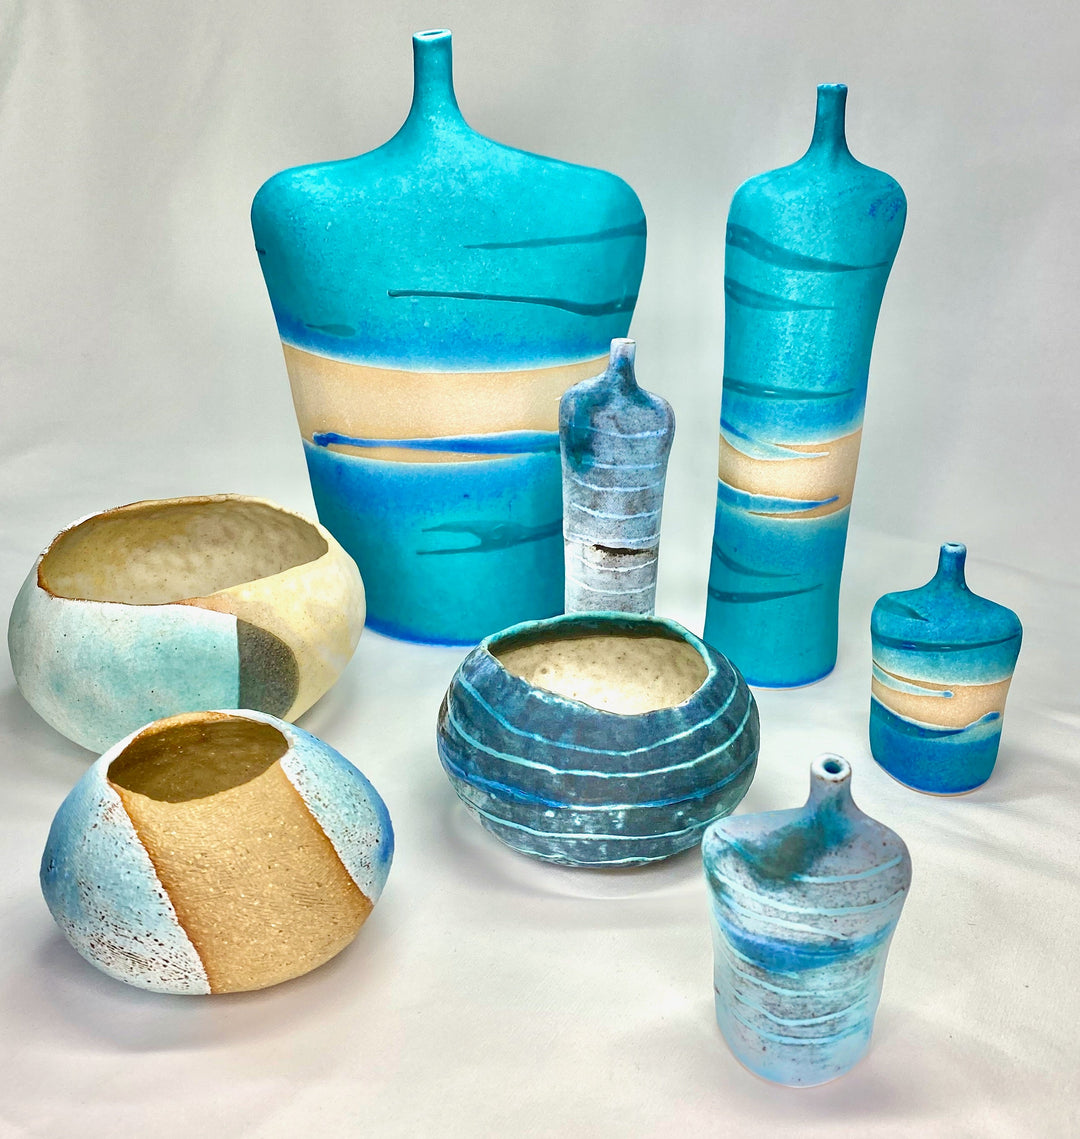 selection of fine stoneware vessels and figurative pieces in turquoise and blues